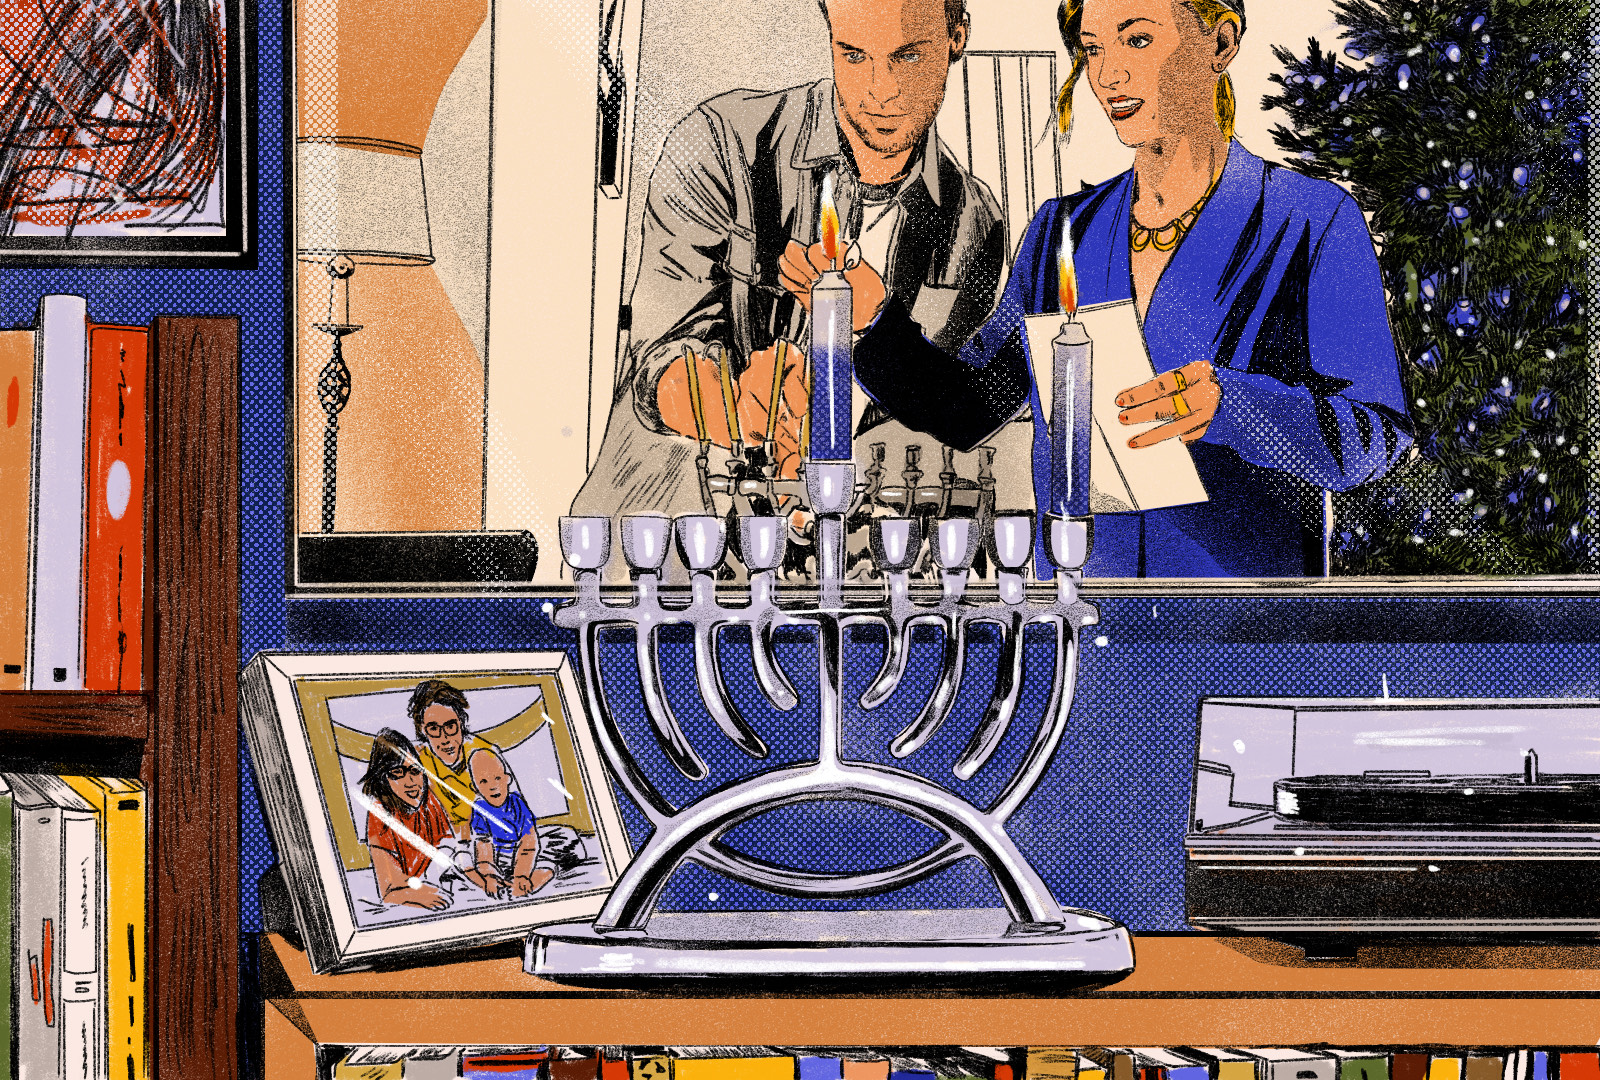 illustration of how hanukkah is manifested in pop culture